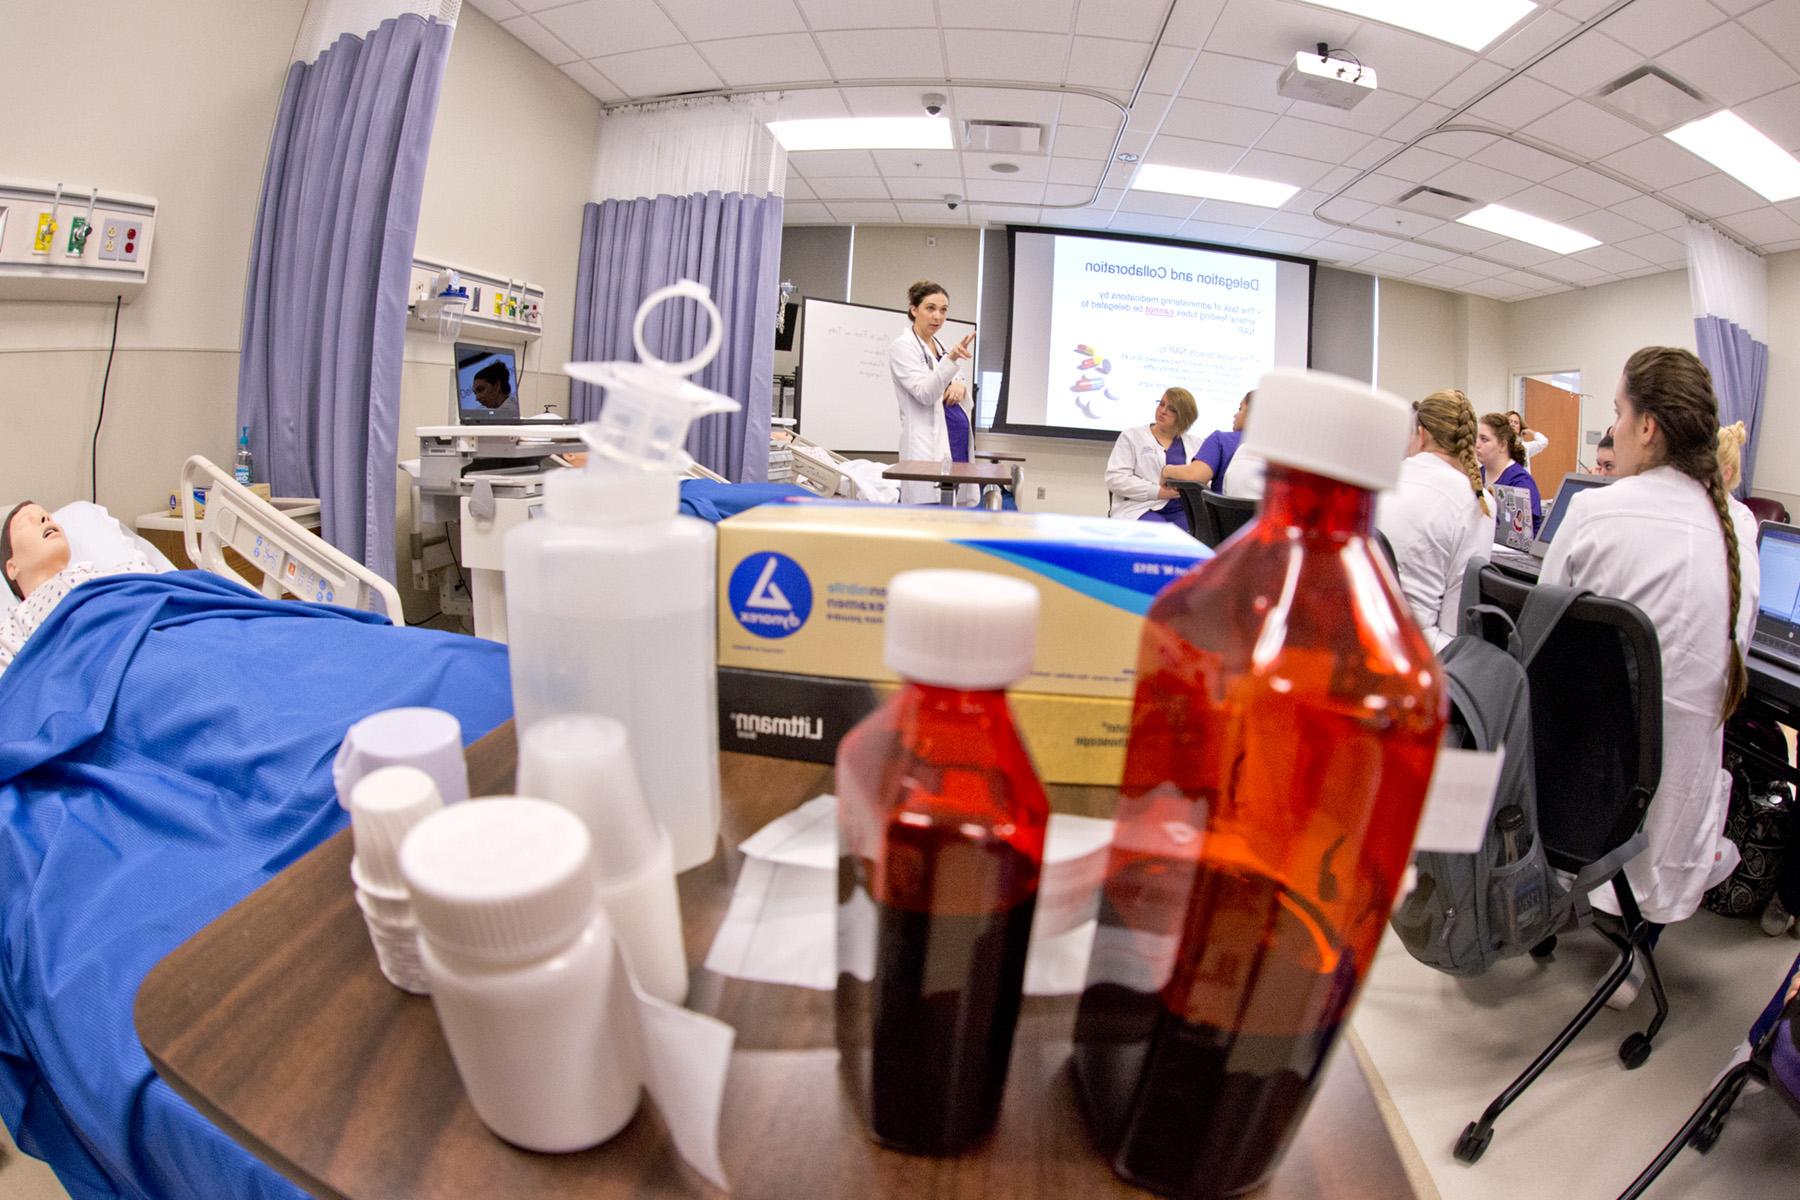 Students in white coats listen to a female professor in front of a projector in a nursing simulation lab surrounded by medical equipment and prescription bottles